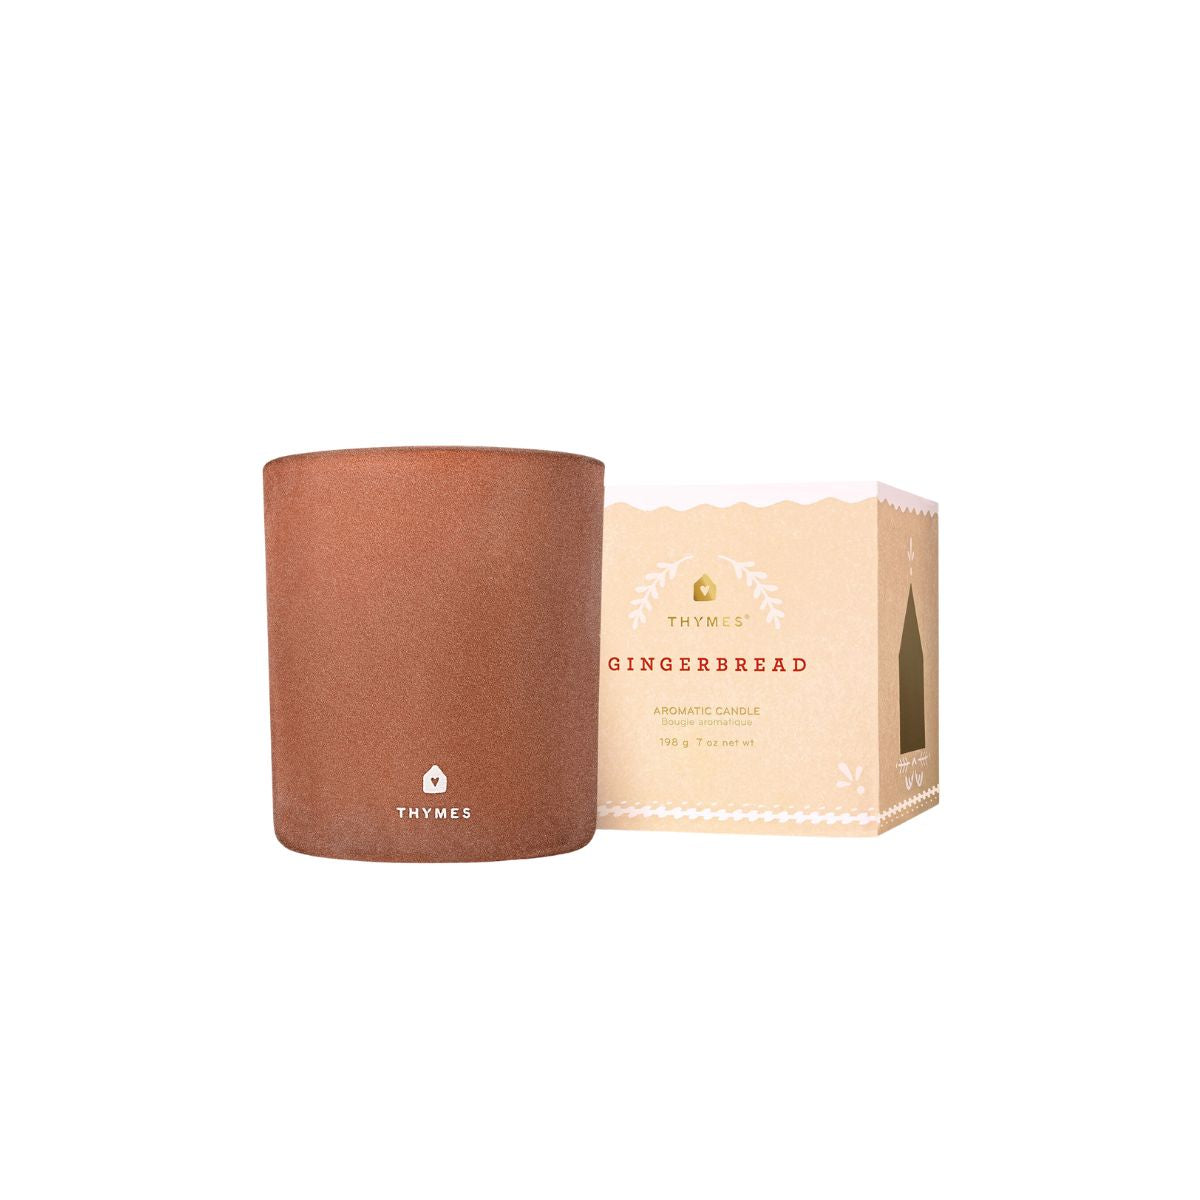 Thymes Medium Gingerbread Poured Candle (7oz)